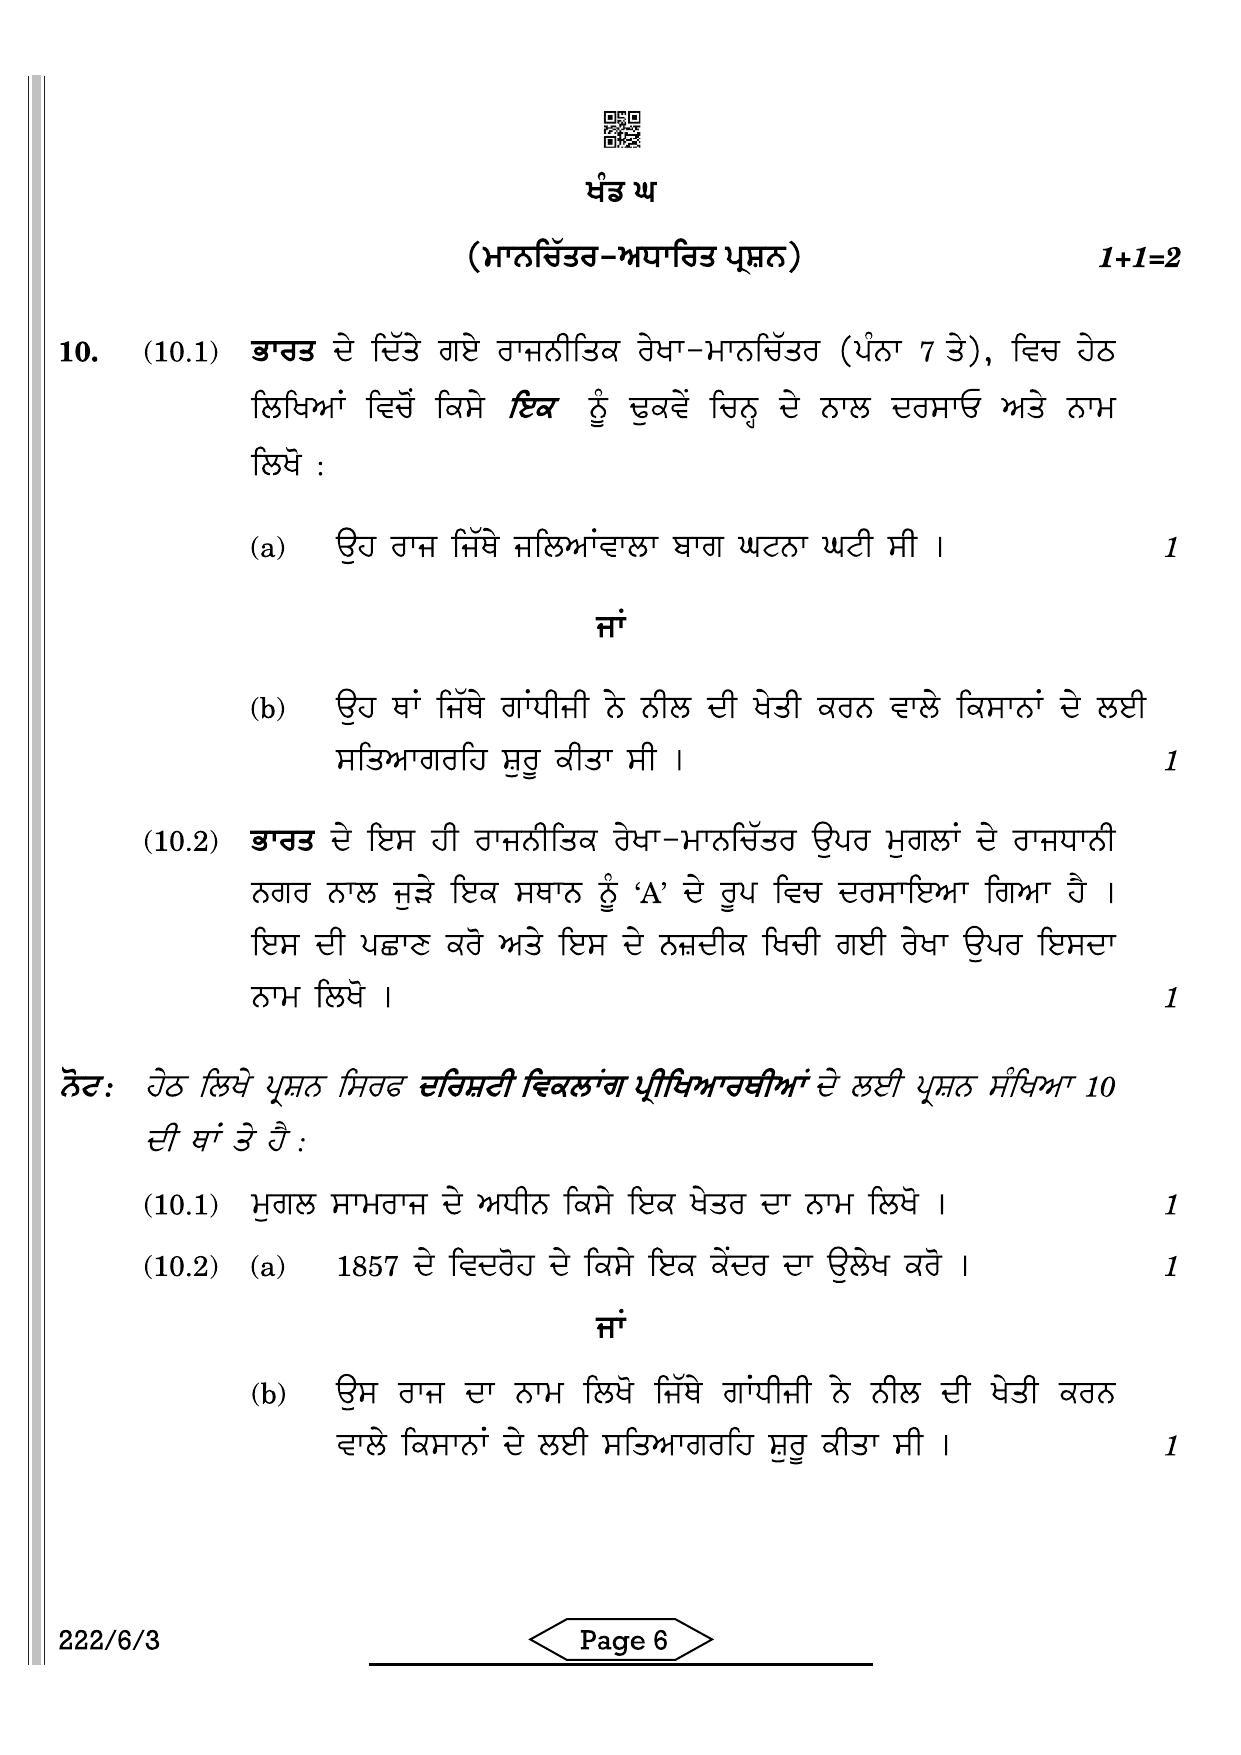 CBSE Class 12 222-6-3 History Punjabi 2022 Compartment Question Paper - Page 6